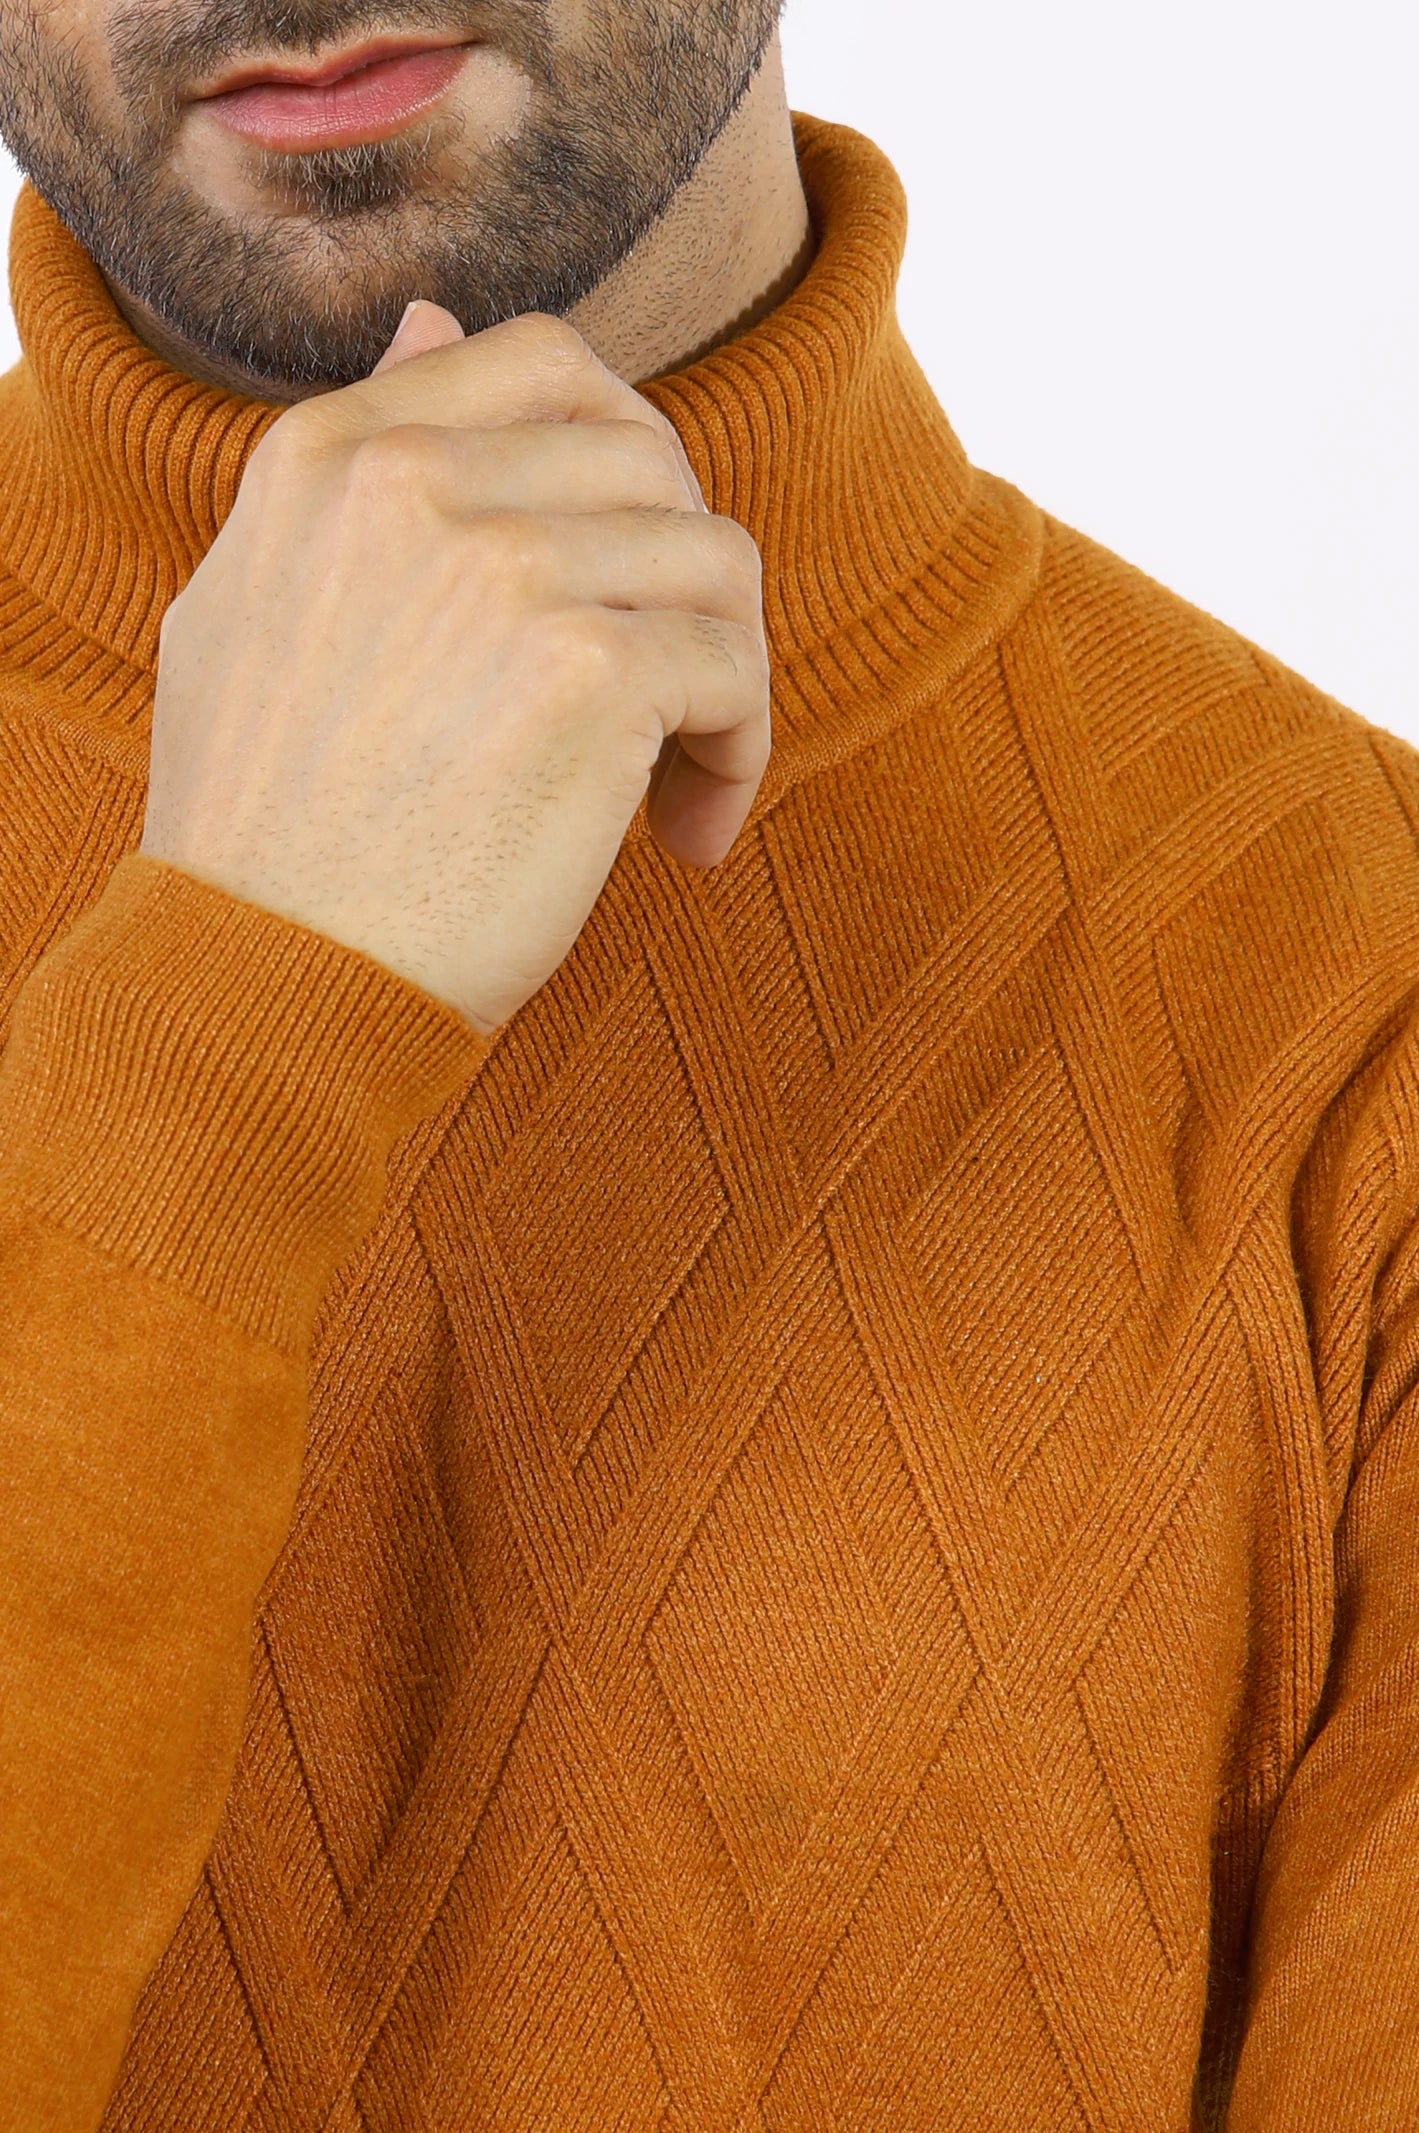 Mustard High Neck Gents Sweater From Diners